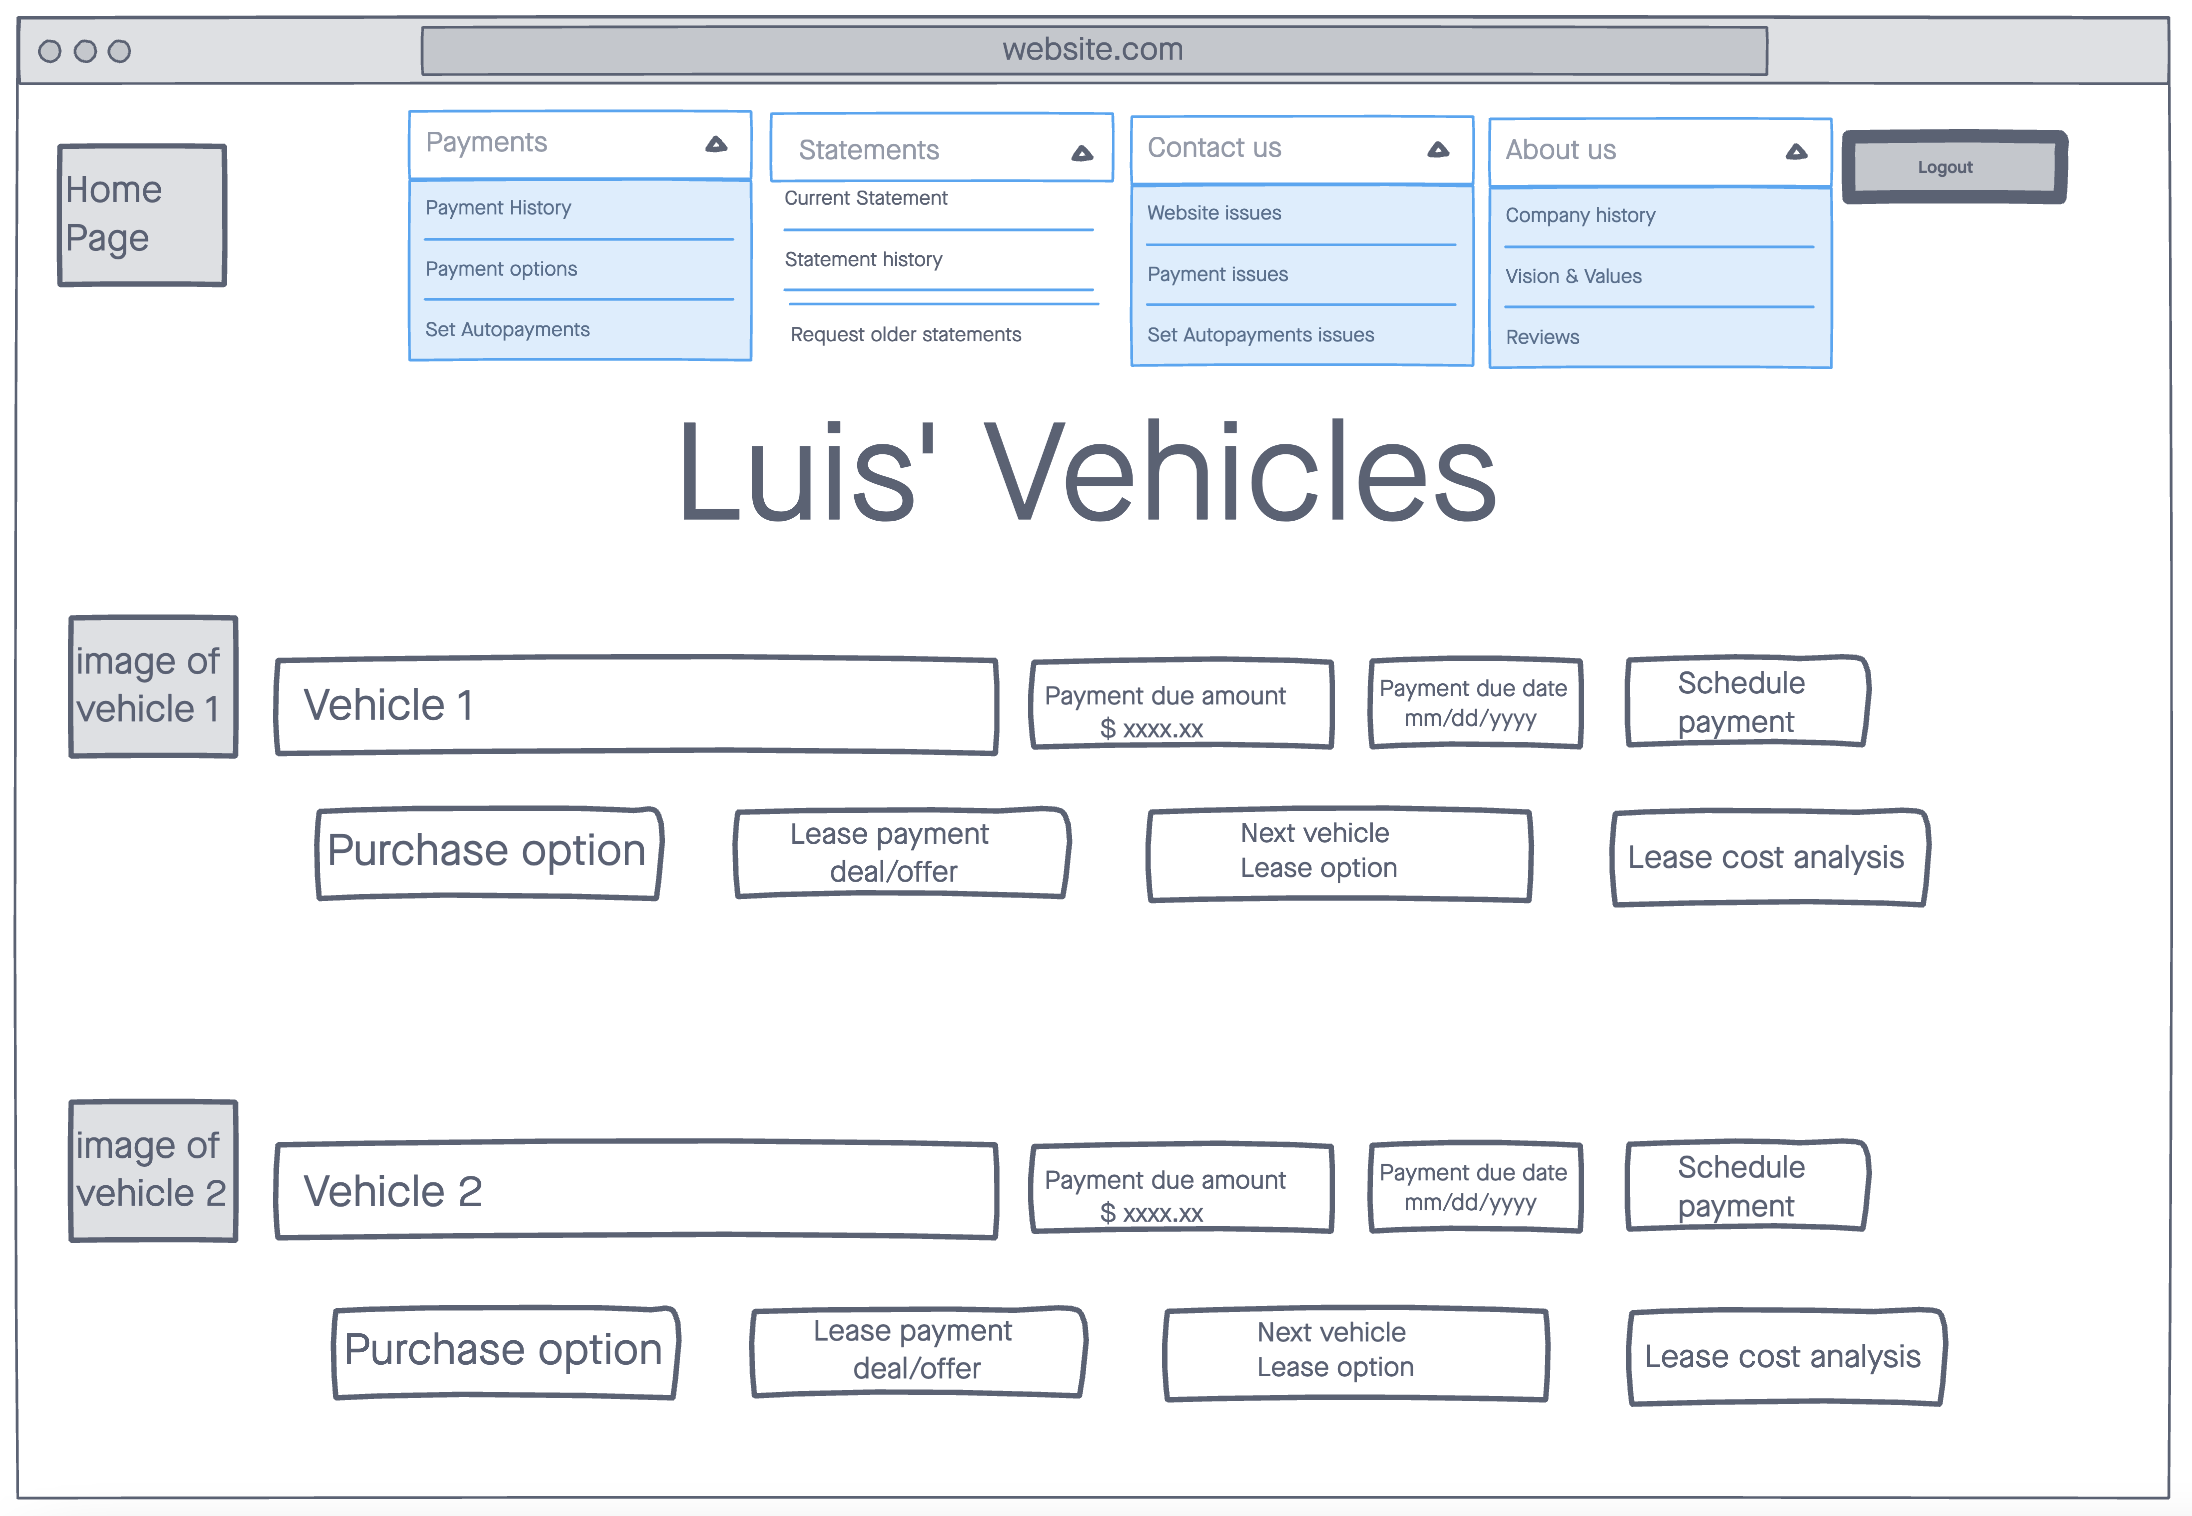 Result of a participatory design sesion showing a desktop version of a leasing website.